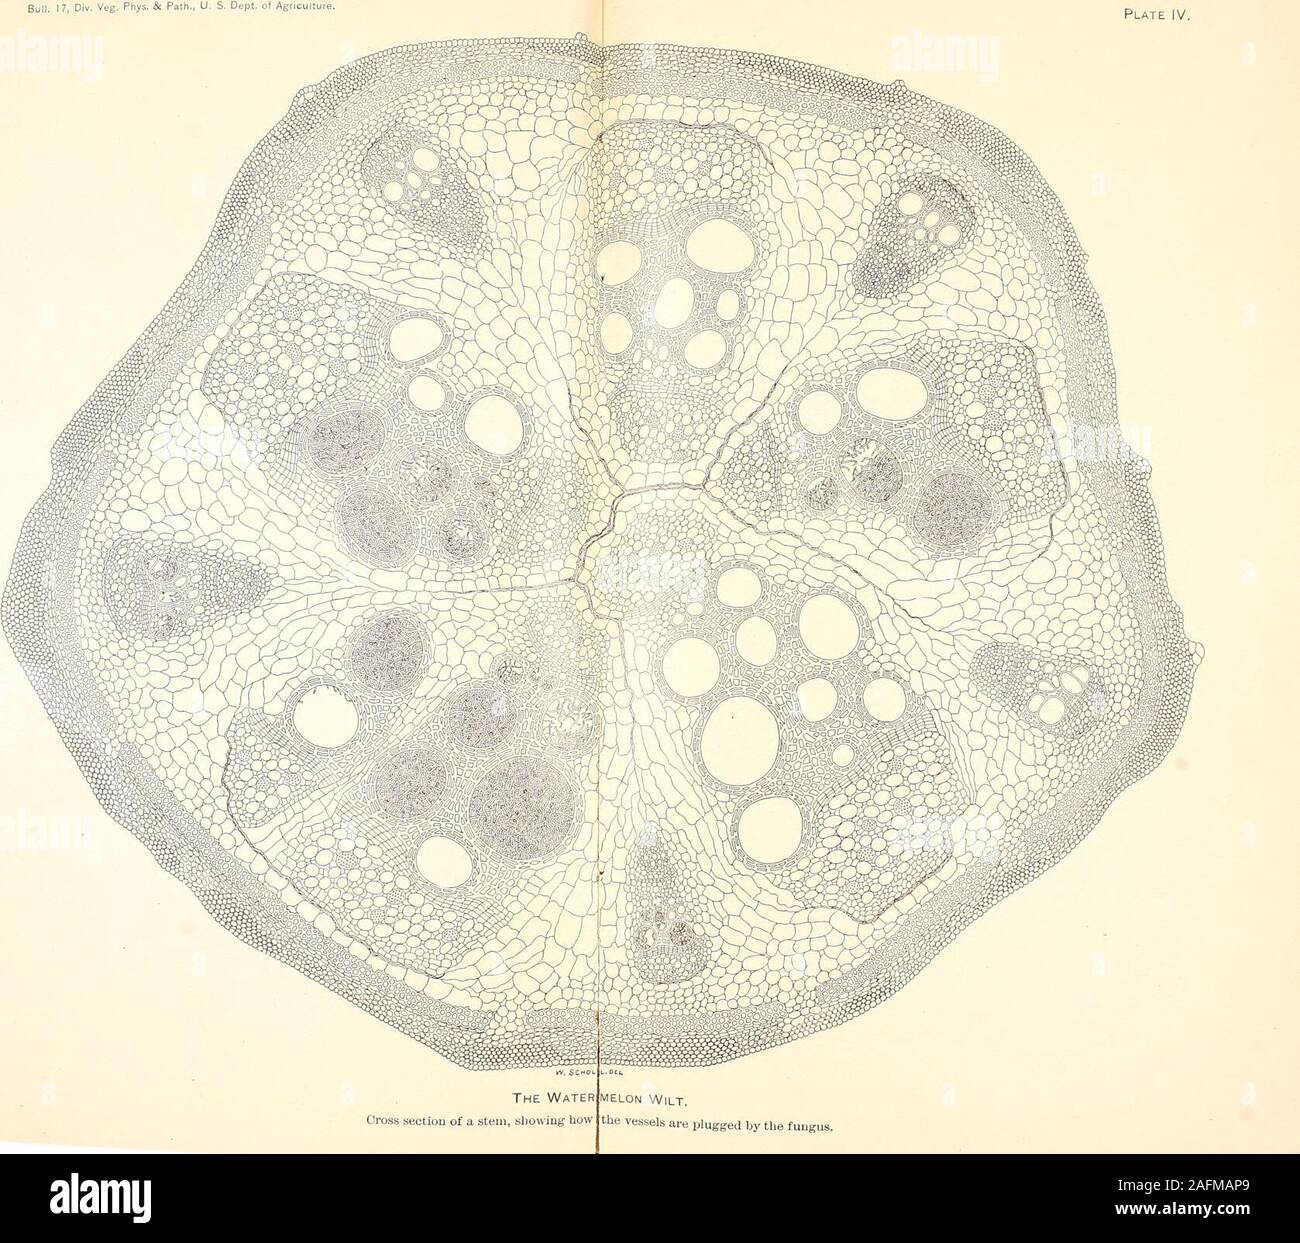 . Wilt disease of cotton, watermelon, and cowpea (Neocosmospora nov. gen.). OIL. ELON Wilt, le vessels are plugged by the fungus.. DESCEIPTIOX OF PLATE Y. 1. Peritlieciiim and ascospores from upland cotton. Salters Depot, WilliamsburgCo., S. C, Oct. 8,1895. Size 352 by 272 //. For comparison witli PL 1,1, whicb, how-ever, is less higlily magnitied. The ascospores of this perithecium vrere 10 by 10 fxTvith a -wrinkled exospore. Others on the same specimens were 9 by 9 «. More rarelythey were 9 by 10 j.i or 9 by 11 2. Pipe ascus and paraphysis from the same lot of specimens as 1. A paraphysisfro Stock Photo